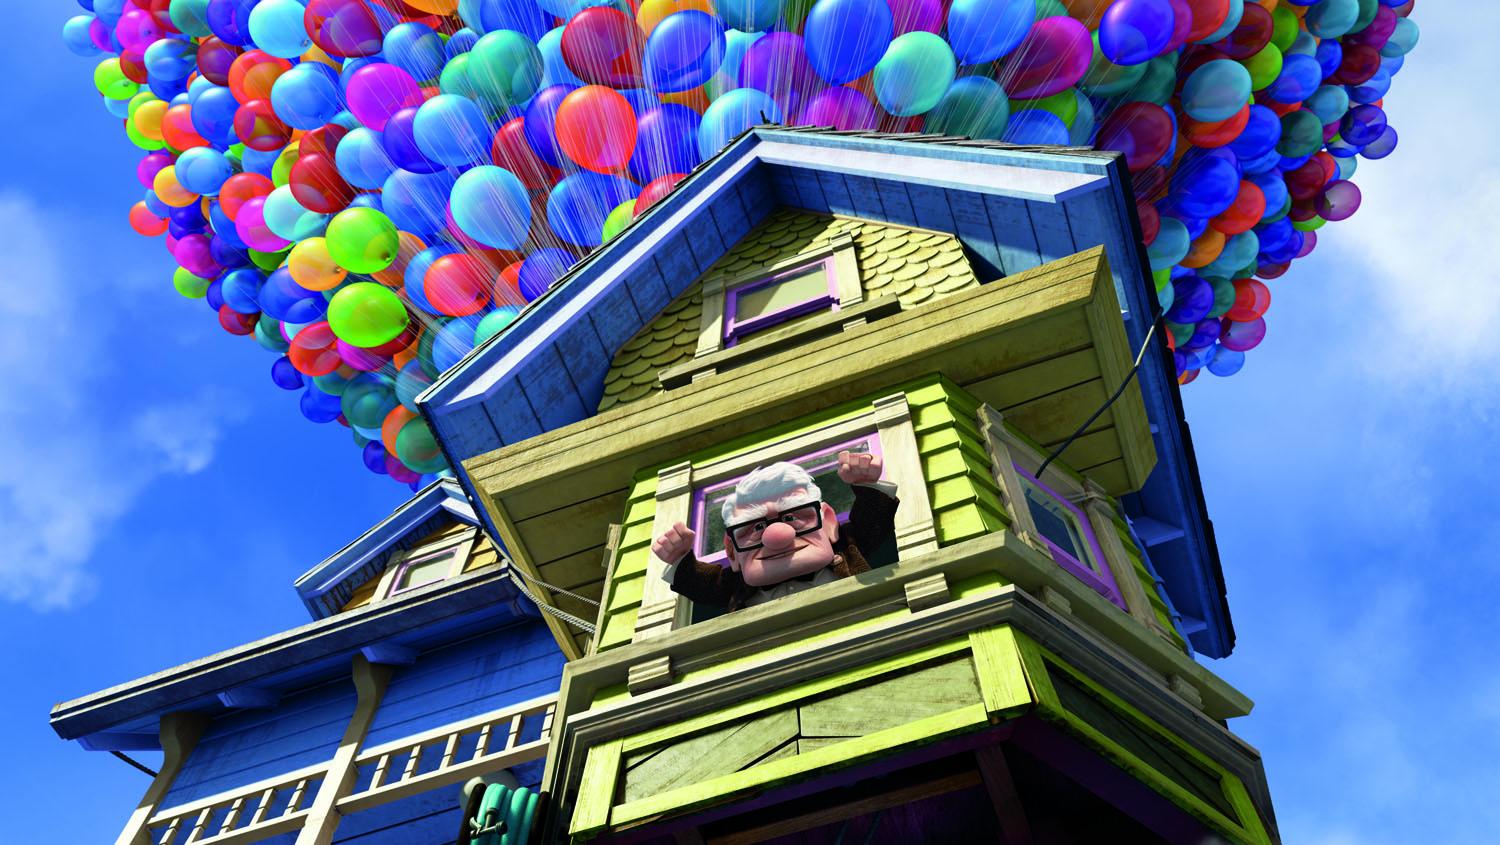 Pixar film ‘Up’ doesn’t live up to its incredible opening (Pixar Animation)